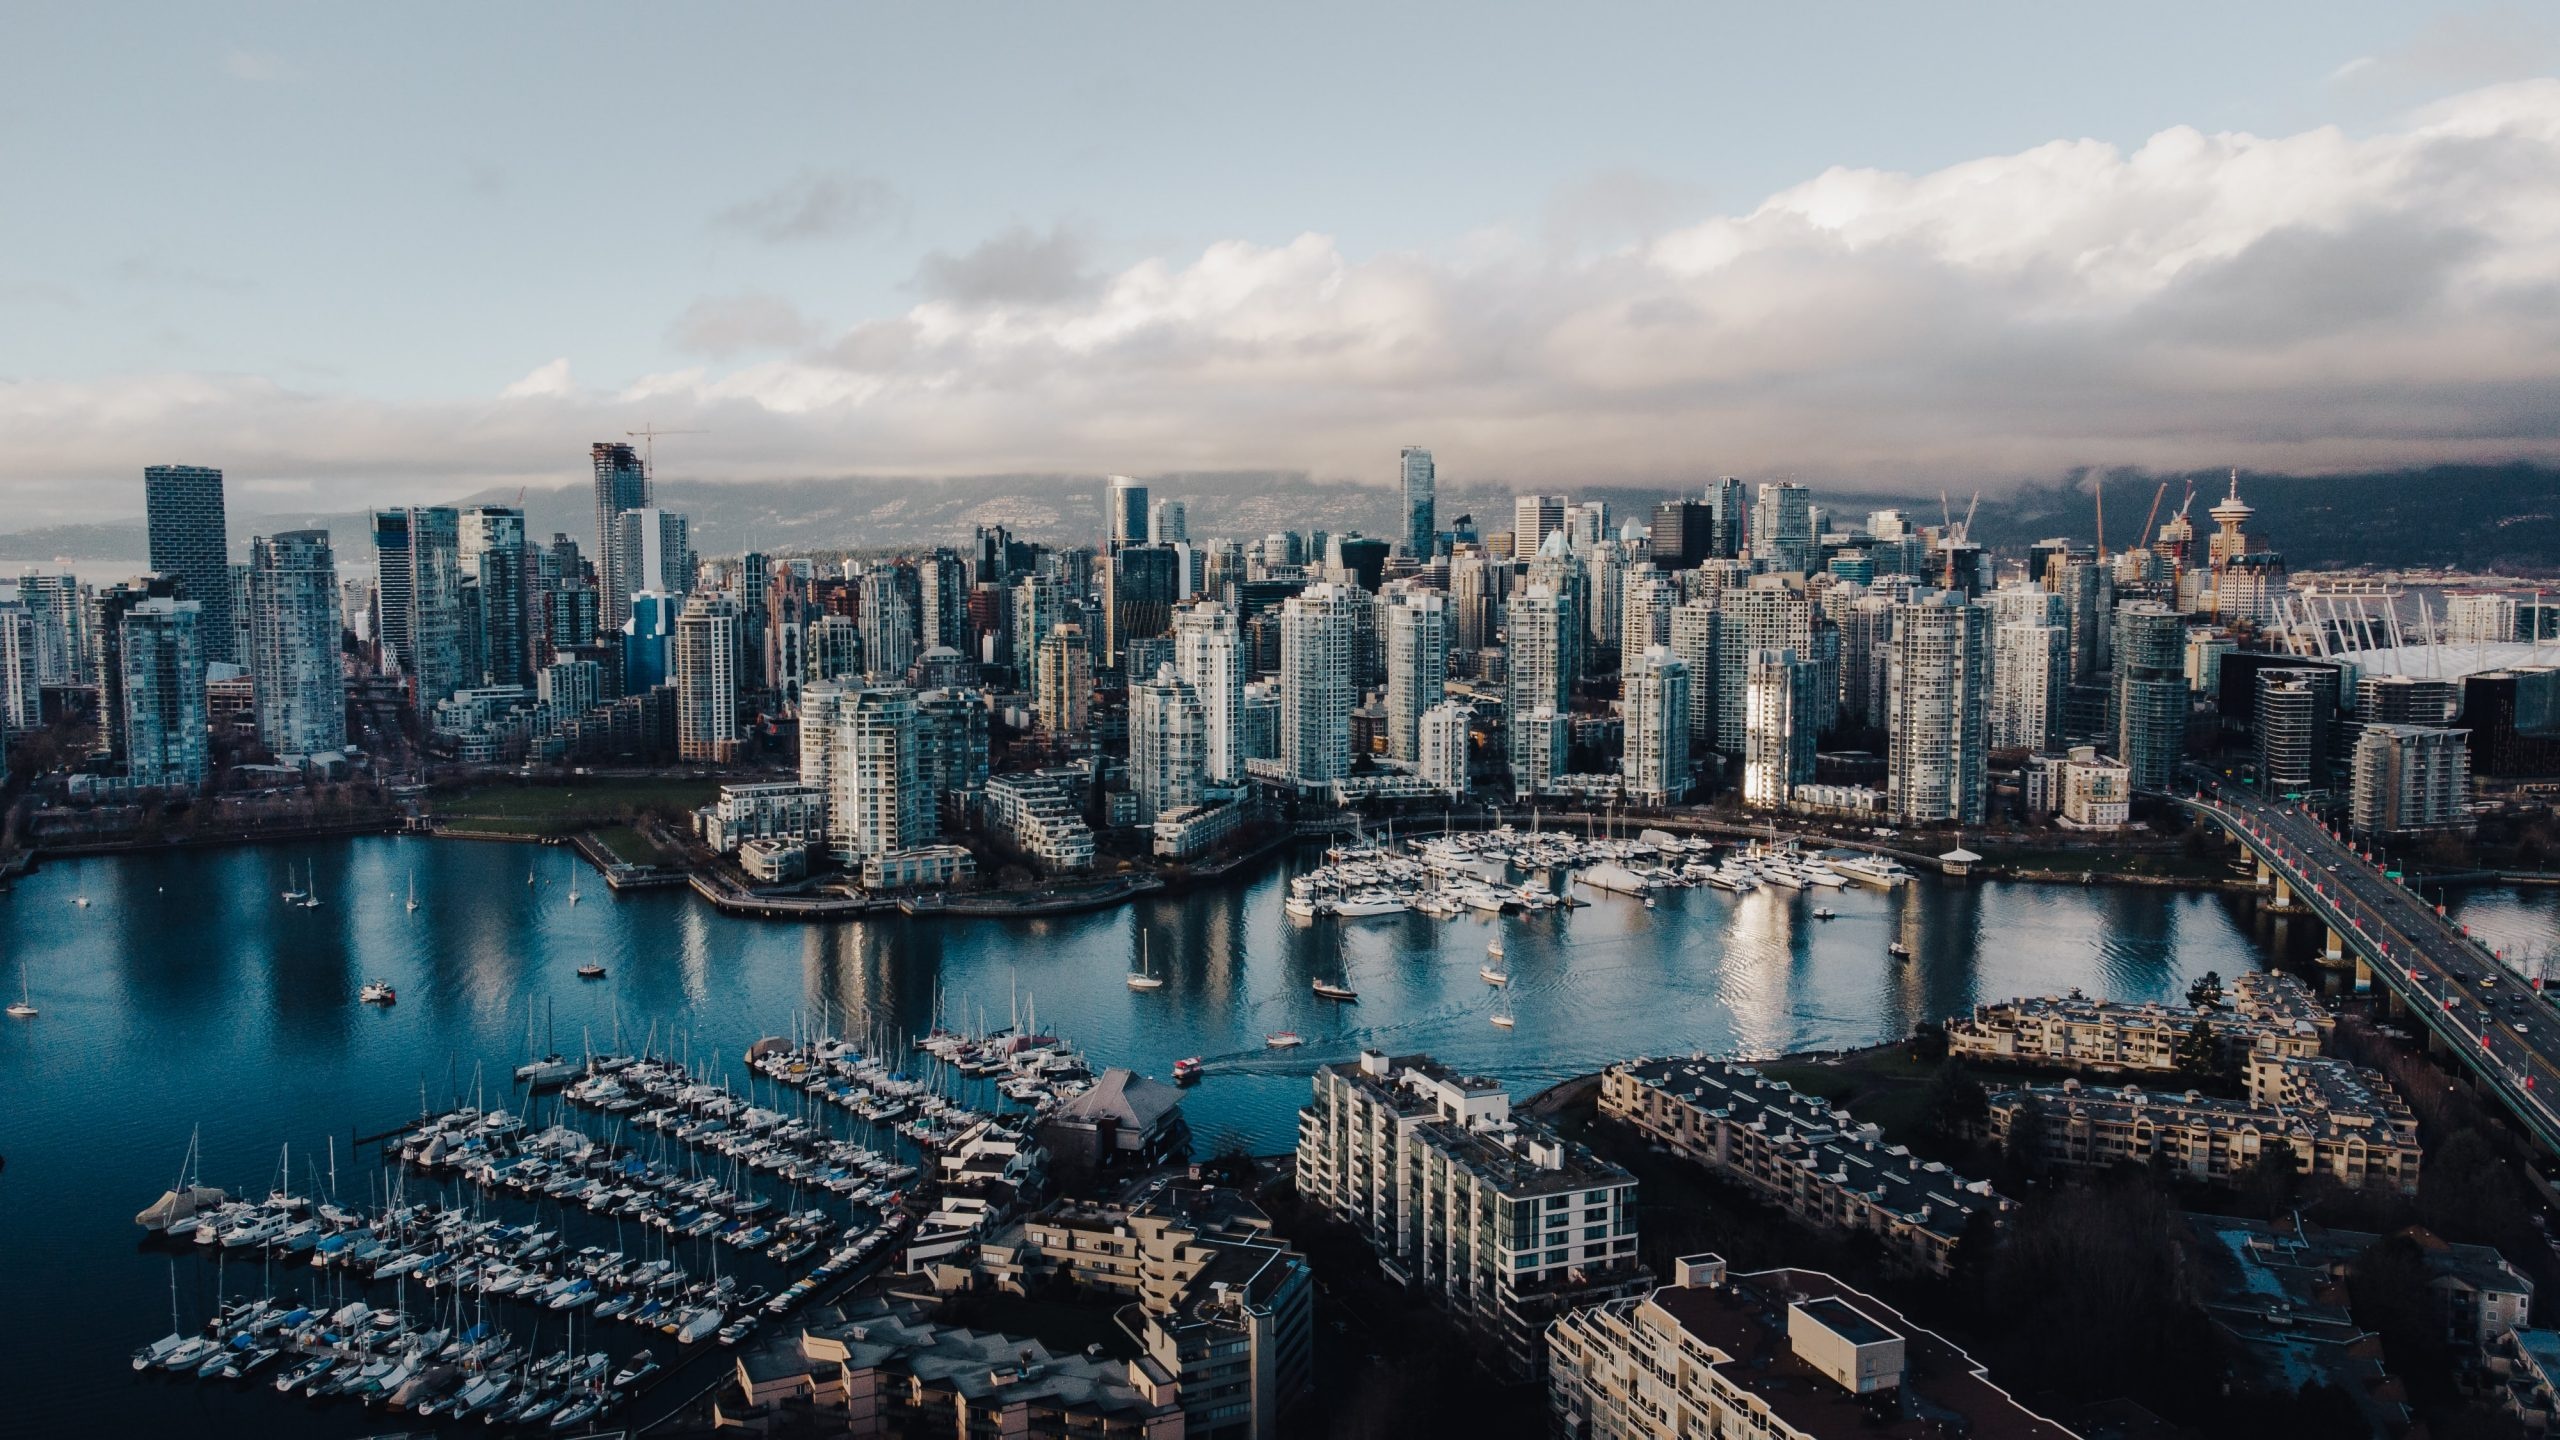 Realtors and Chinese clients are rushing to close property deals in Vancouver ahead of Canada’s nation-wide ban on foreign home buyers, as more Chinese are looking to move to Vancouver amid China’s pandemic lockdowns. Photo: Unsplash